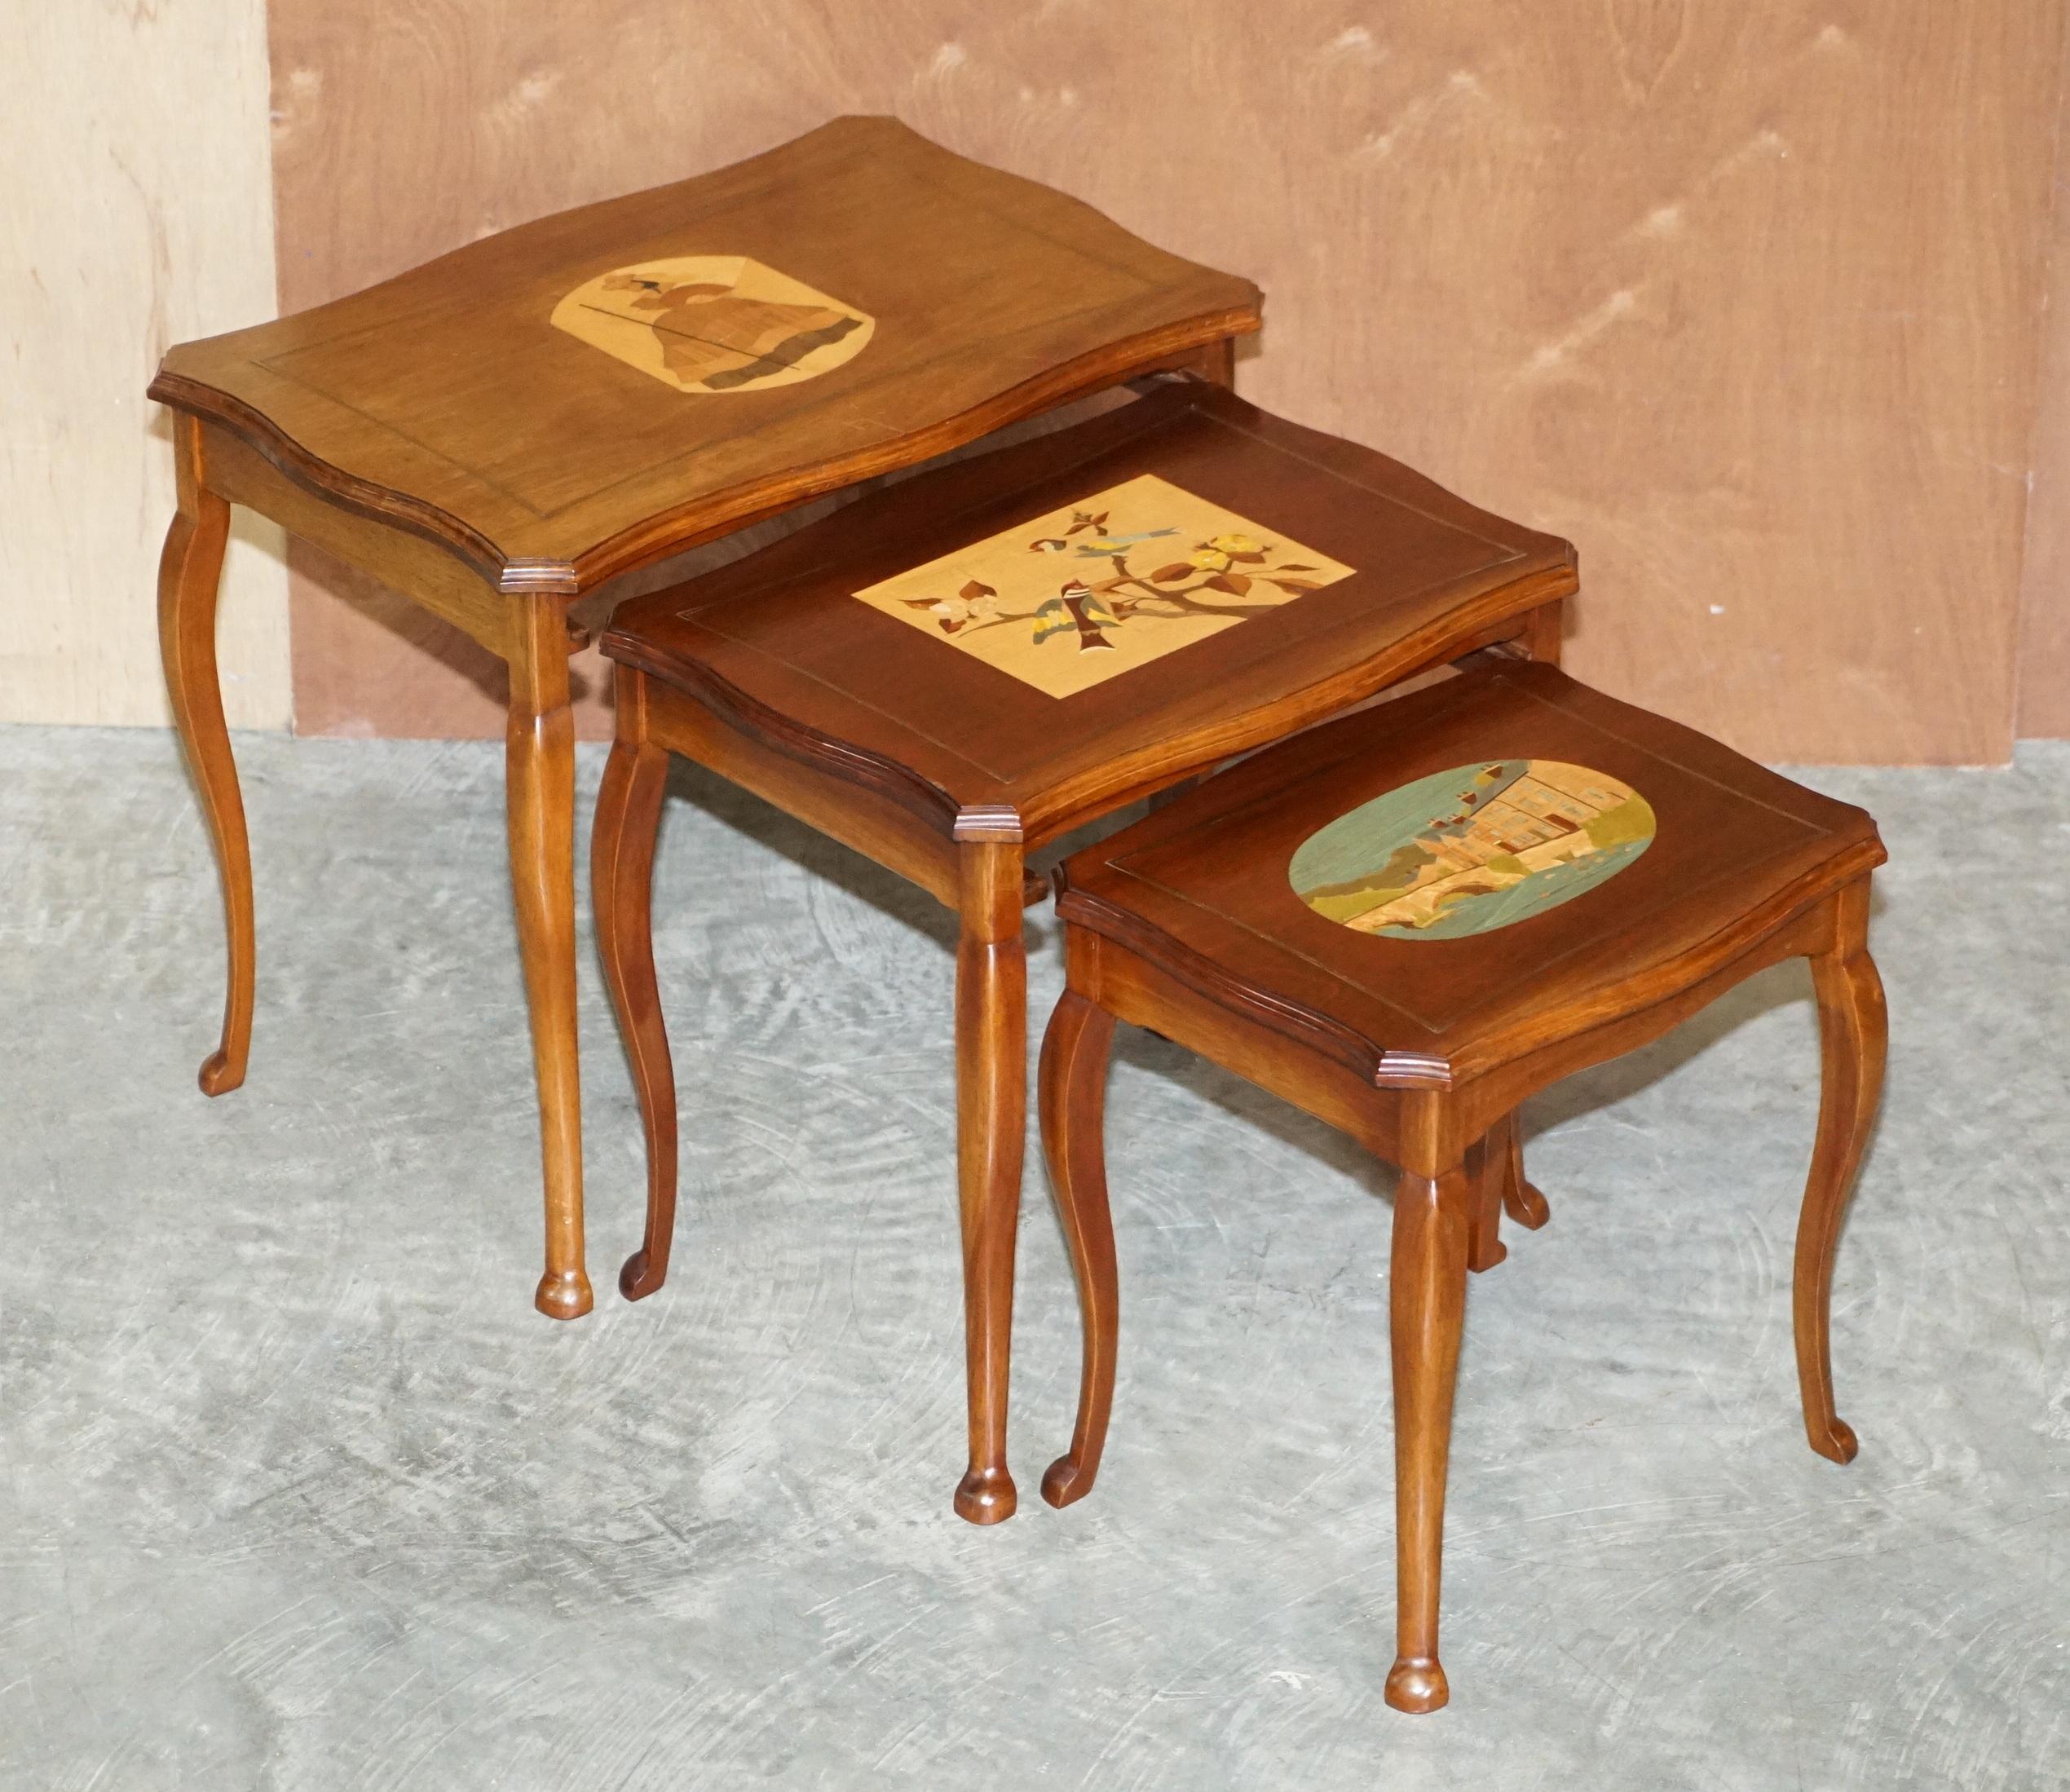 We are delighted to offer for sale this lovely nest of three tables with inlaid marquetry wood panels which have been hand painted

A very good looking and well made nest, each table depicts a different scene, the first one has a French lady in an